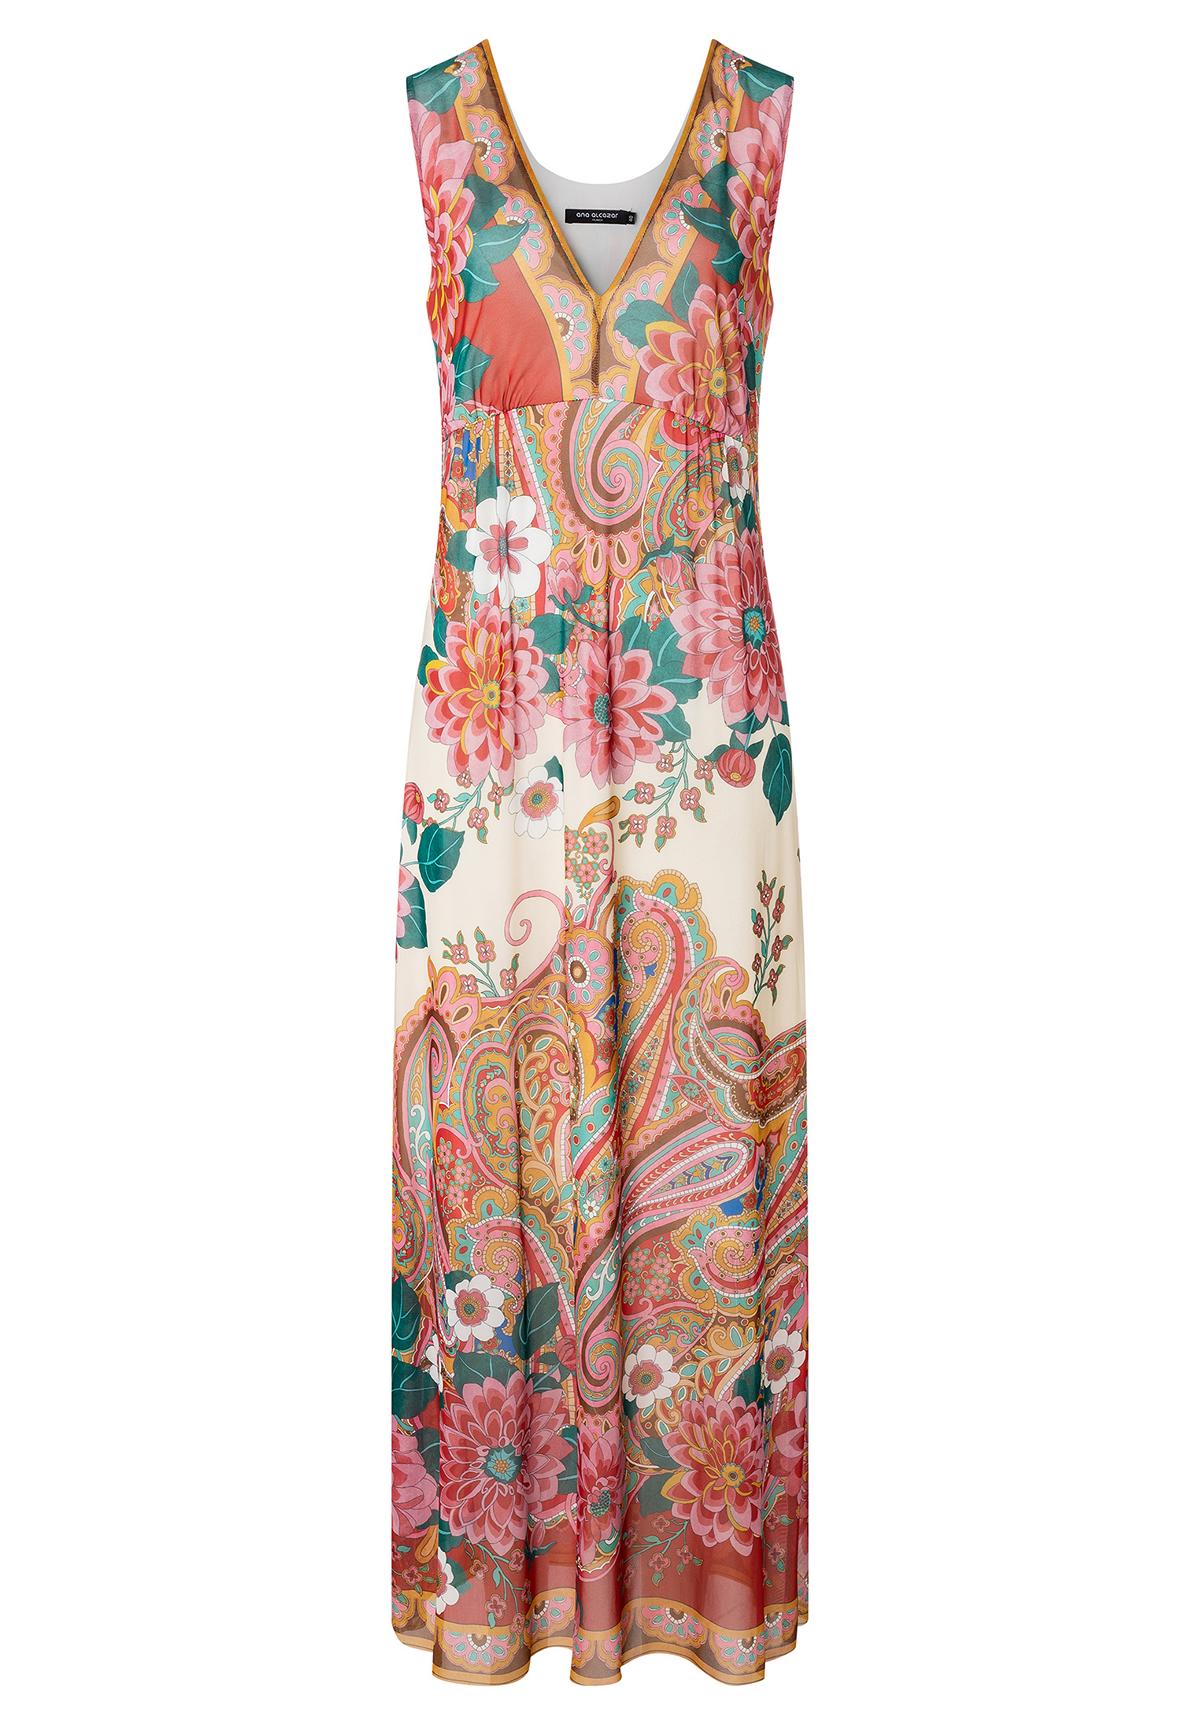 Sleeveless Maxi Dress Kemine with V-Neck and Flowers in Red, Green ...